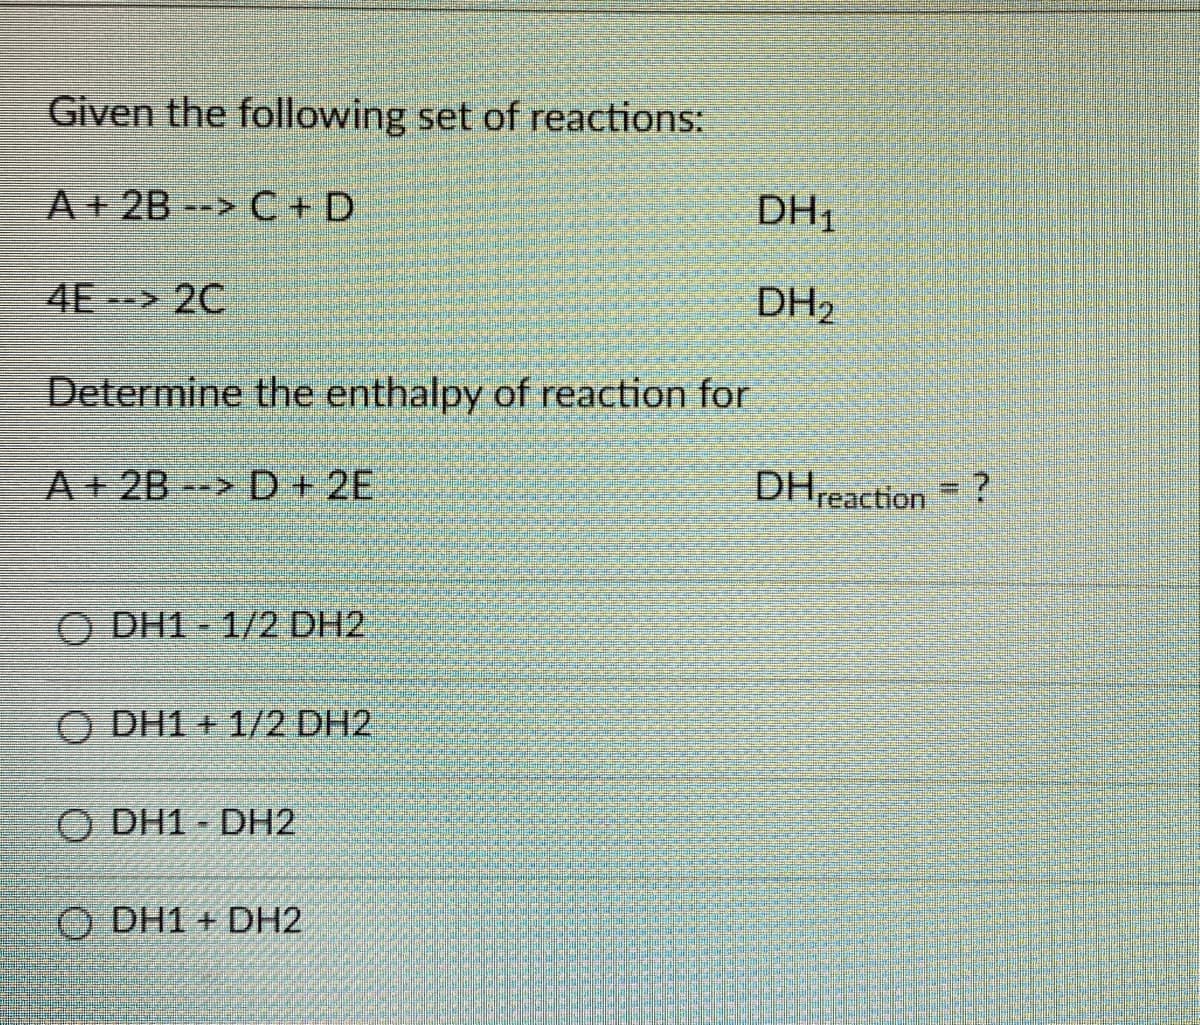 Given the following set of reactions:
A+ 2B --> C+ D
DH1
4E 2C
DH2
Determine the enthalpy of reaction for
A 28> D + 2E
DHreaction = ?
O DH1 - 1/2 DH2
O DH1 + 1/2 DH2
O DH1 - DH2
O DH1 + DH2
